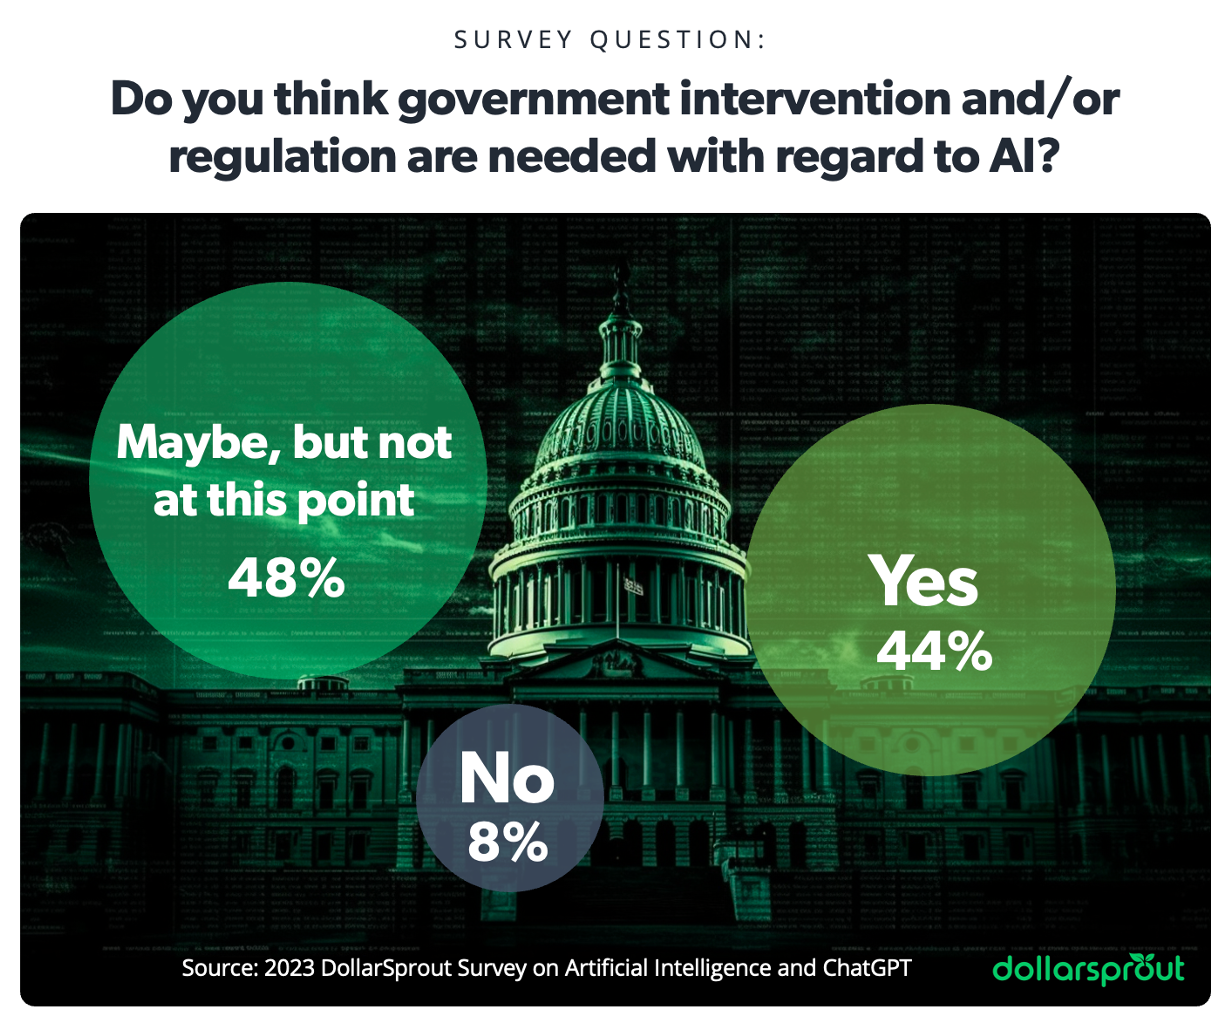 Graphic showing that when it comes to government intervention in AI, 44% of respondents think that regulation and/or intervention are needed. Meanwhile, 48% said "maybe, but not at this point in time," and 8% said no regulation or intervention is needed or will be needed. These findings show that the majority of people are cautious about AI development and believe that oversight may be necessary at some point.